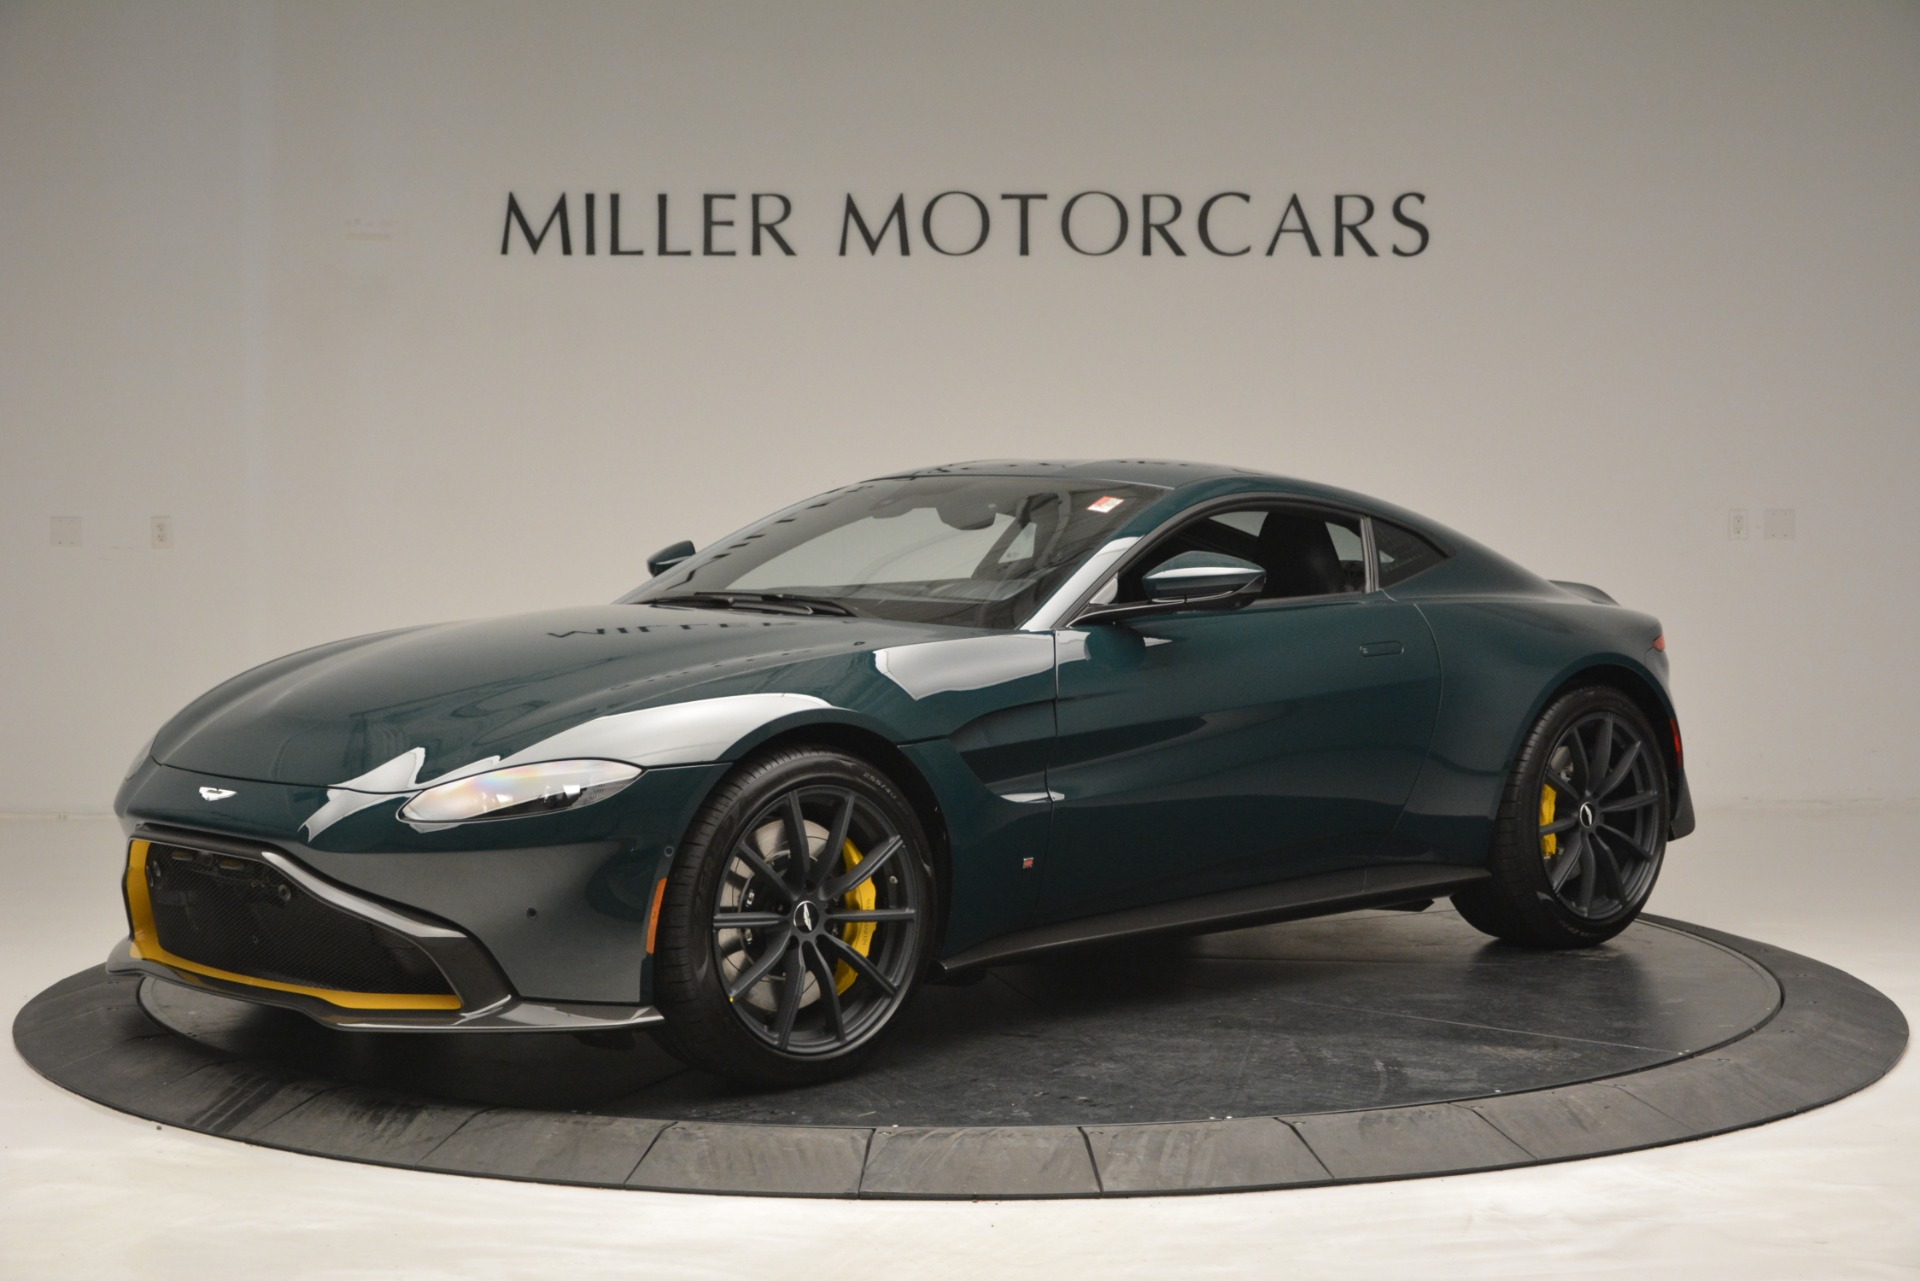 Used 2019 Aston Martin Vantage Coupe for sale Sold at Alfa Romeo of Greenwich in Greenwich CT 06830 1